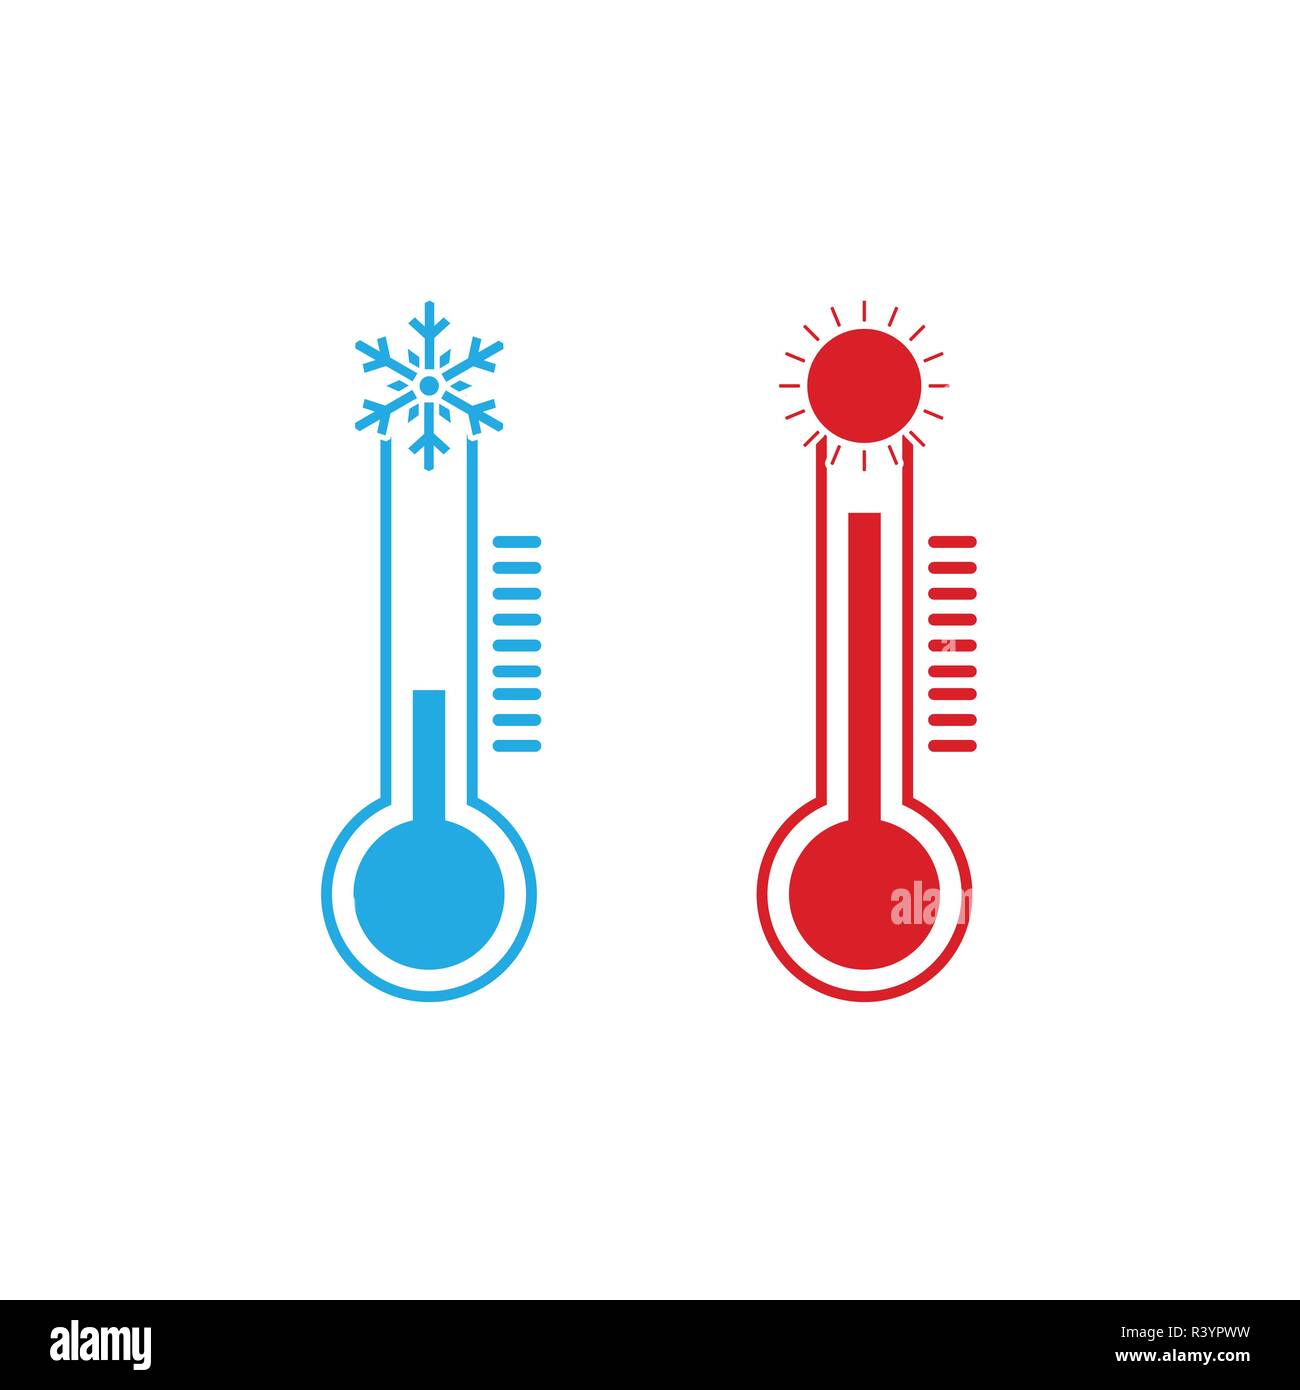 https://c8.alamy.com/comp/R3YPWW/thermometer-icon-vector-illustration-cold-hot-weather-flat-R3YPWW.jpg